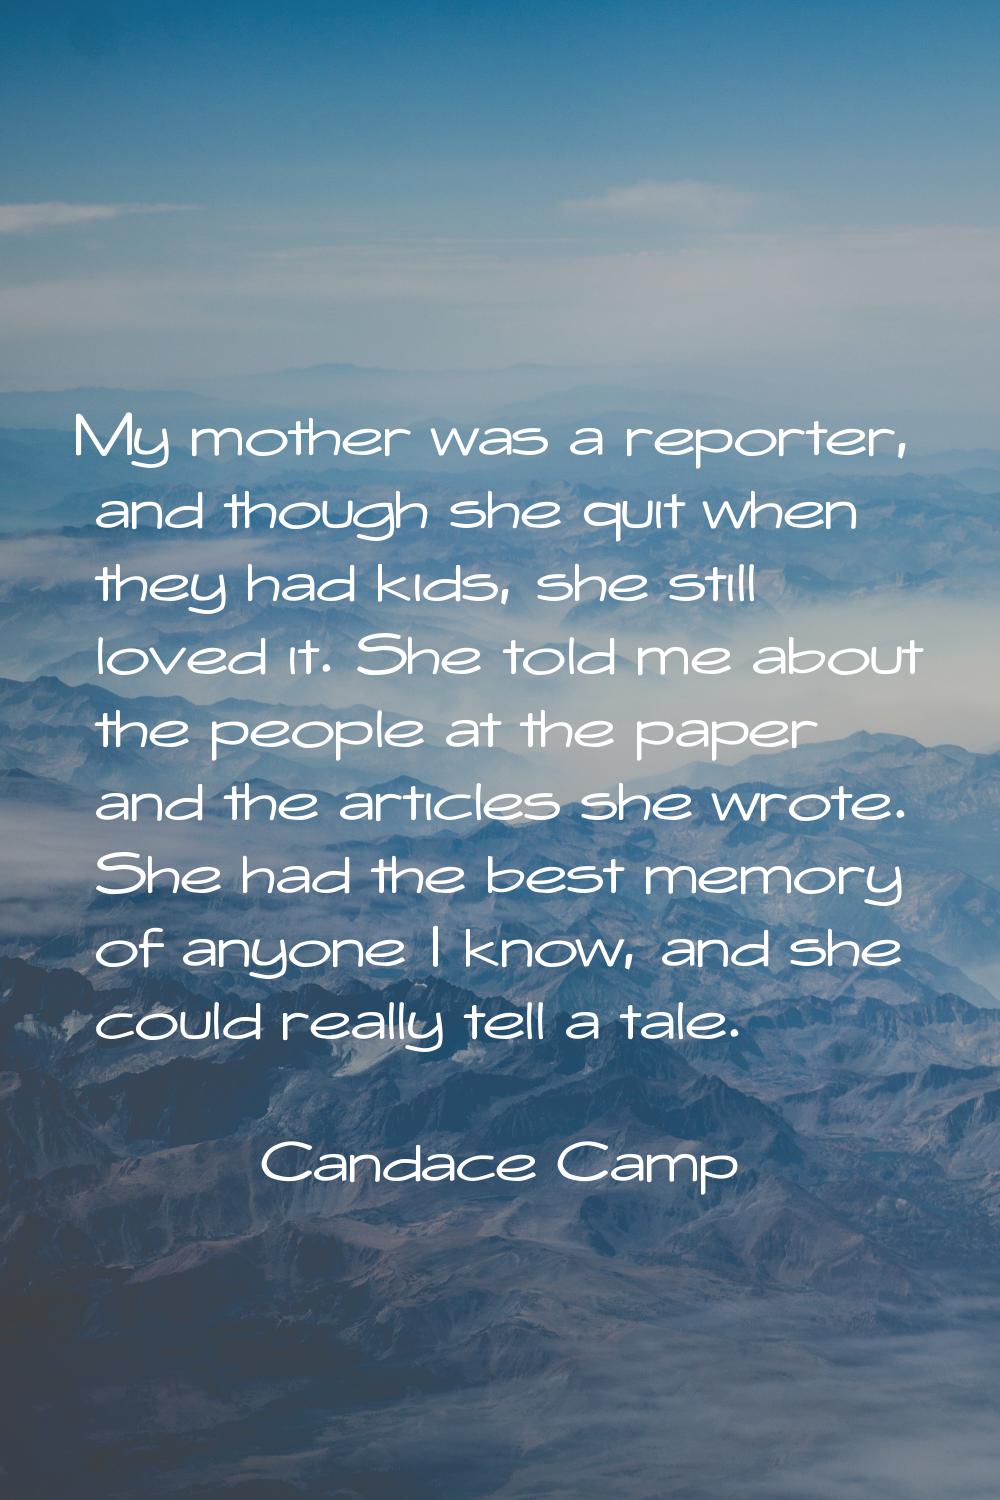 My mother was a reporter, and though she quit when they had kids, she still loved it. She told me a